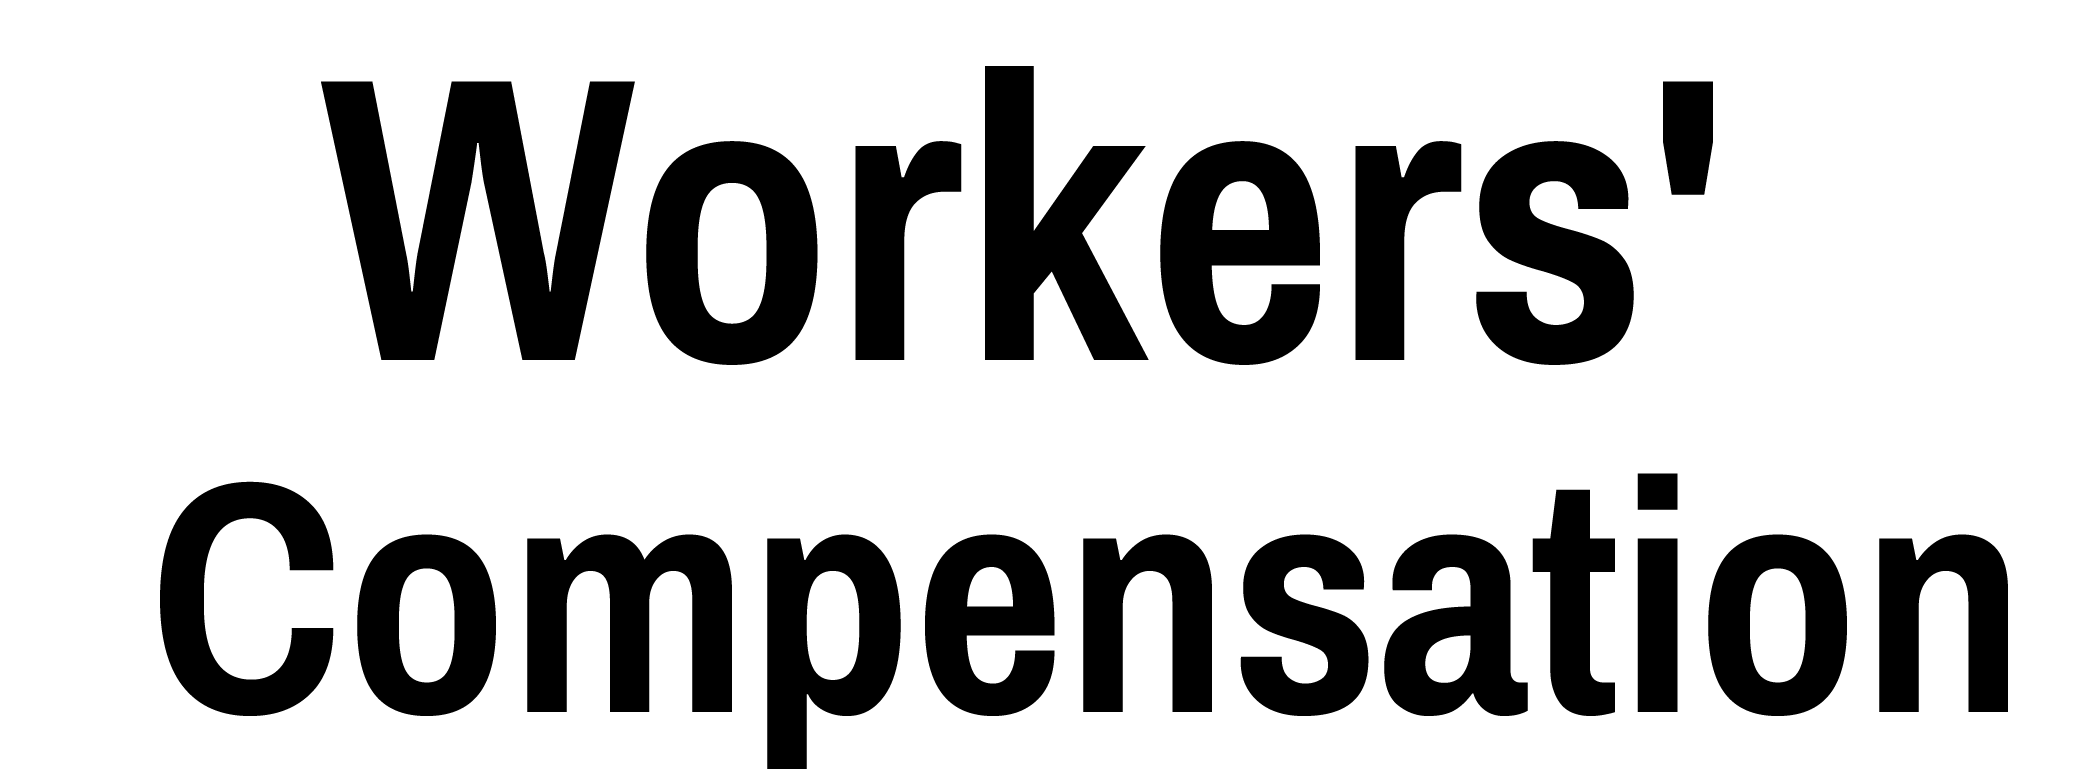 Workers Comp